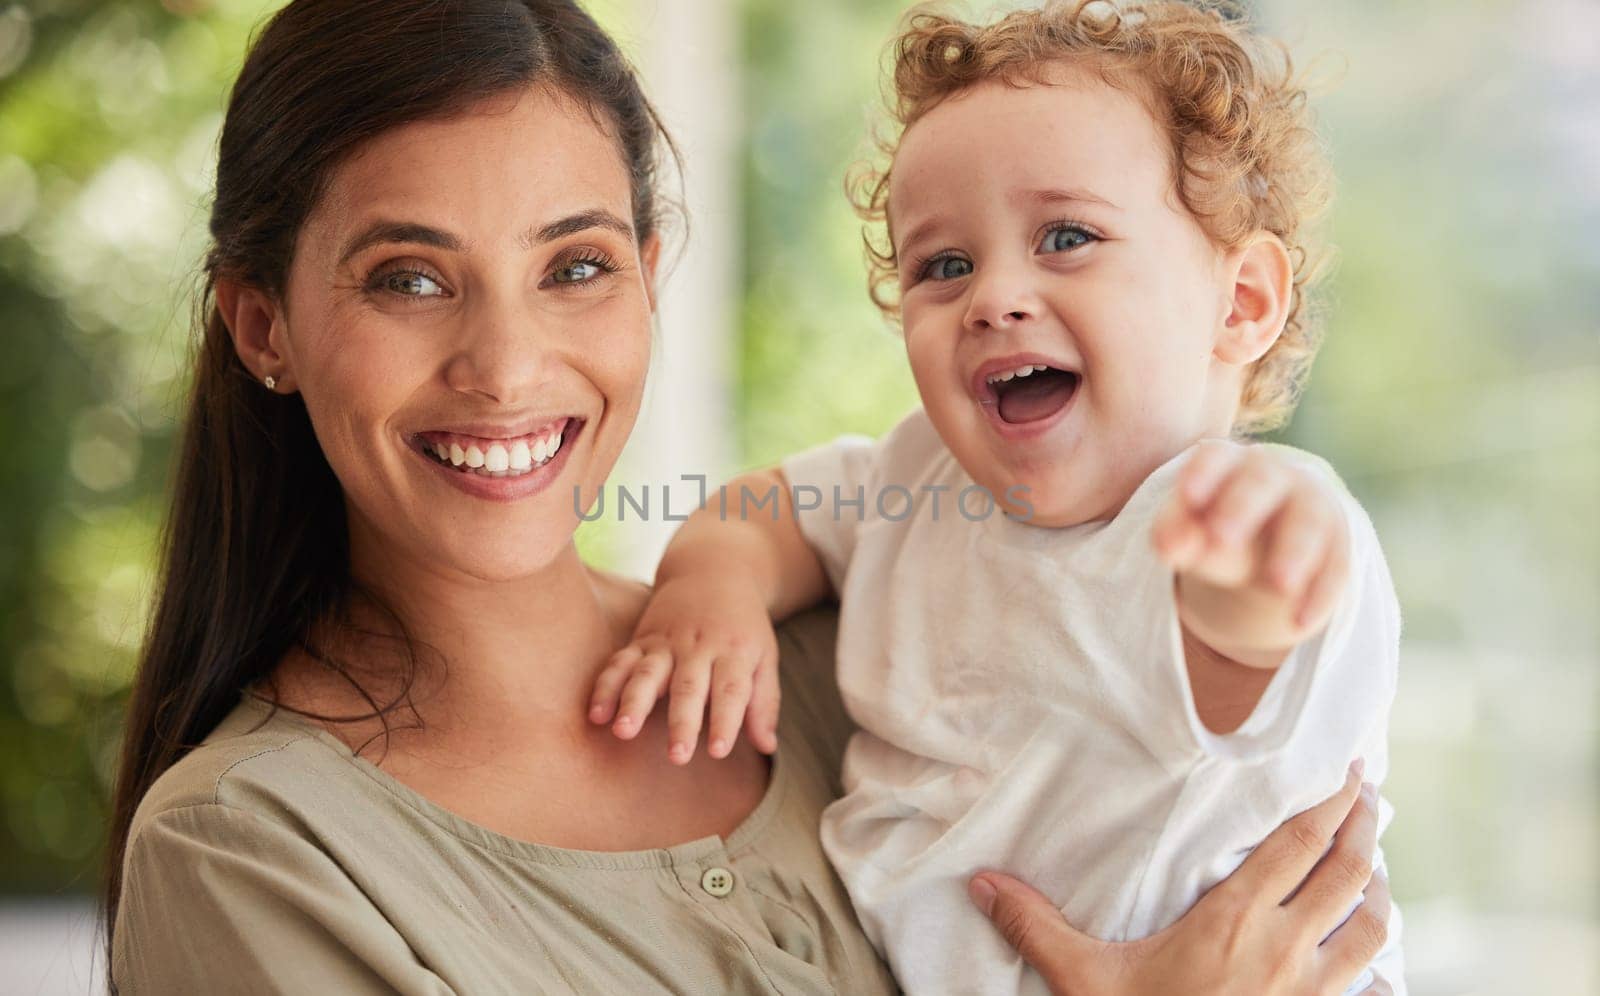 Family, baby and love with a mother and son in their home with a smile and feeling happy or excited together. Portrait, children and cute with a woman and her adopted boy child bonding in their house.